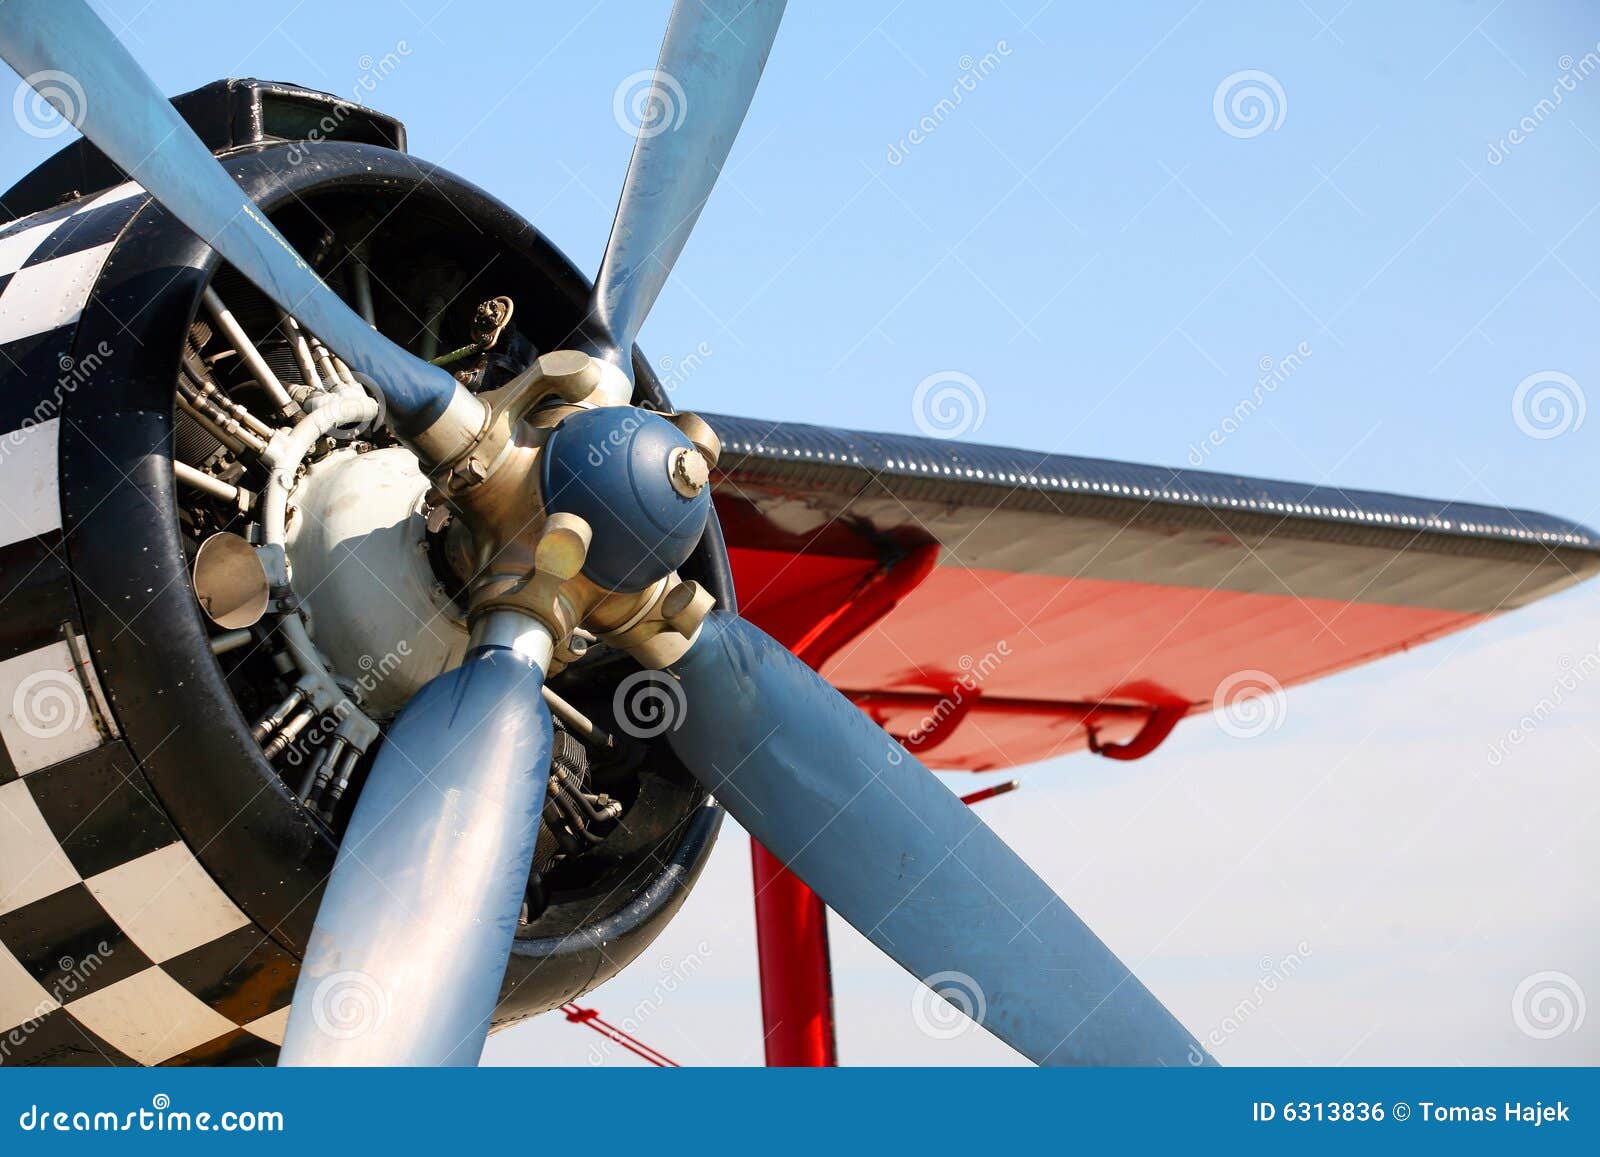 propeller of old airplane